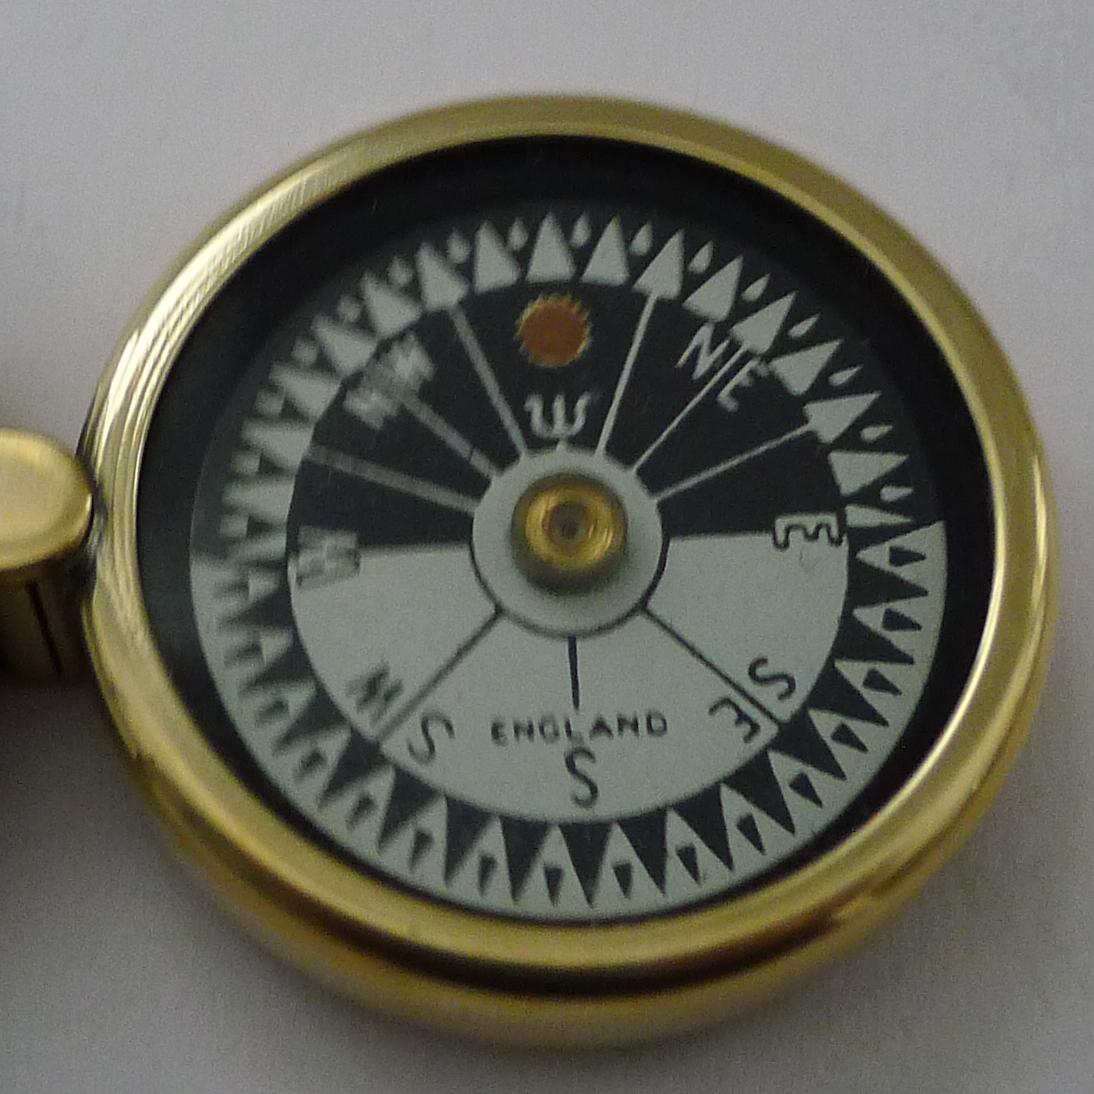 Unusual Antique English Folding Compass In Brass Case c.1900 In Good Condition For Sale In Bath, GB